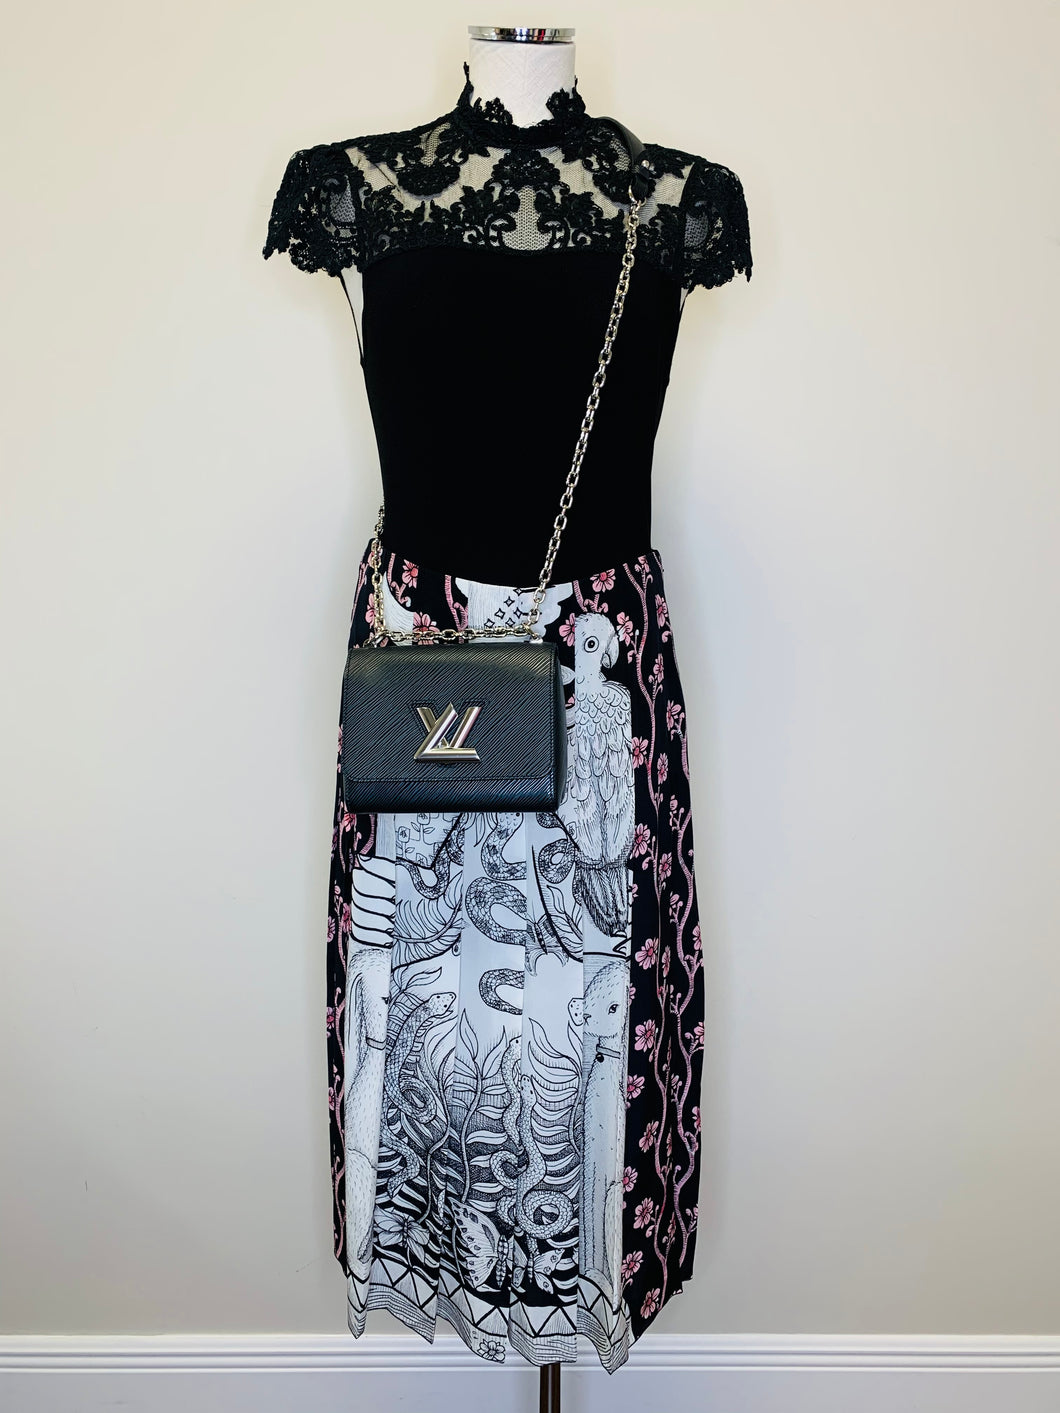 Alice + Olivia Black Lace and Jersey Top Size M